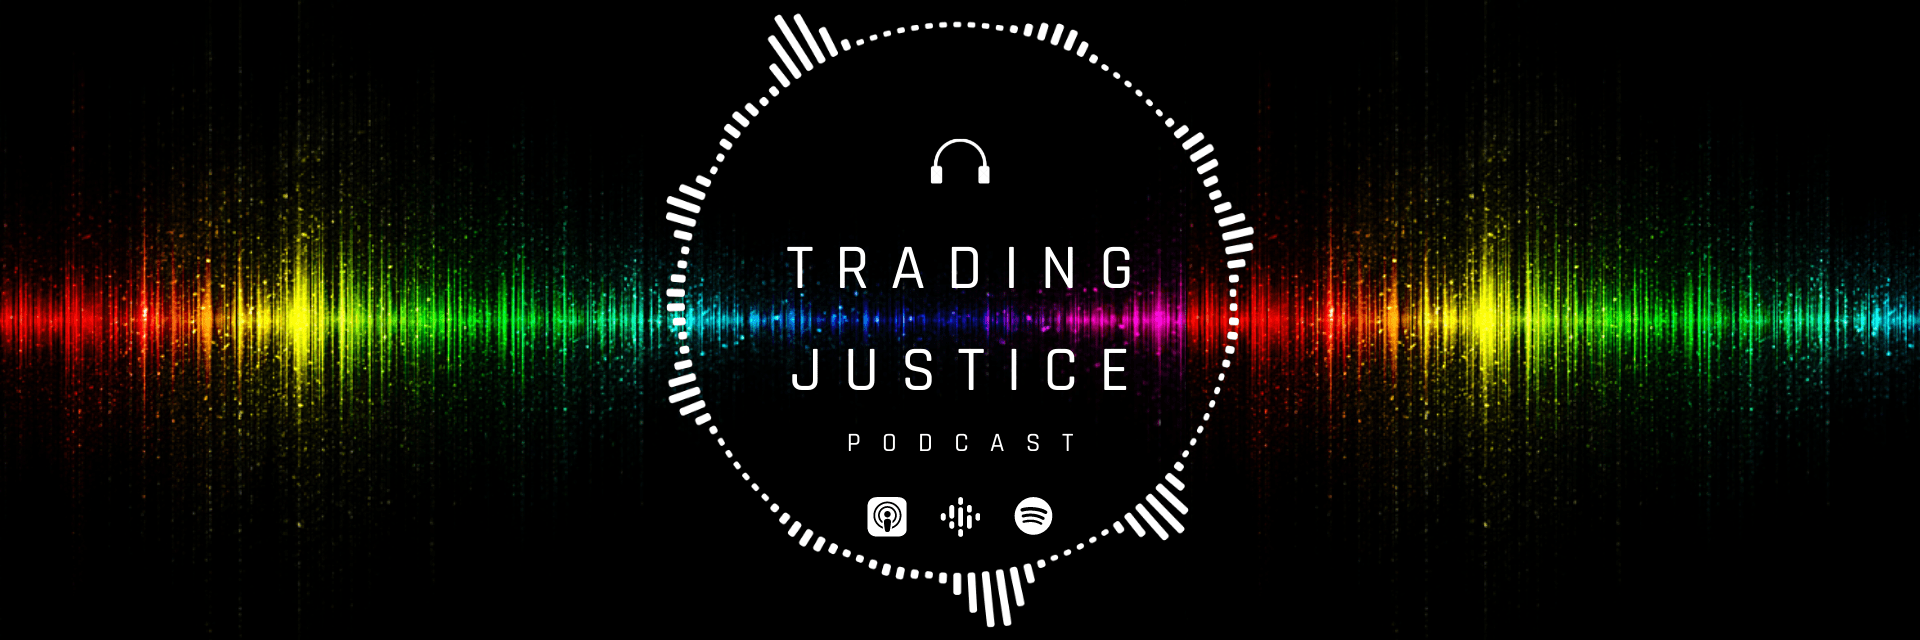 Trading Justice Podcast: Each week your hosts guide you on a journey of financial education.